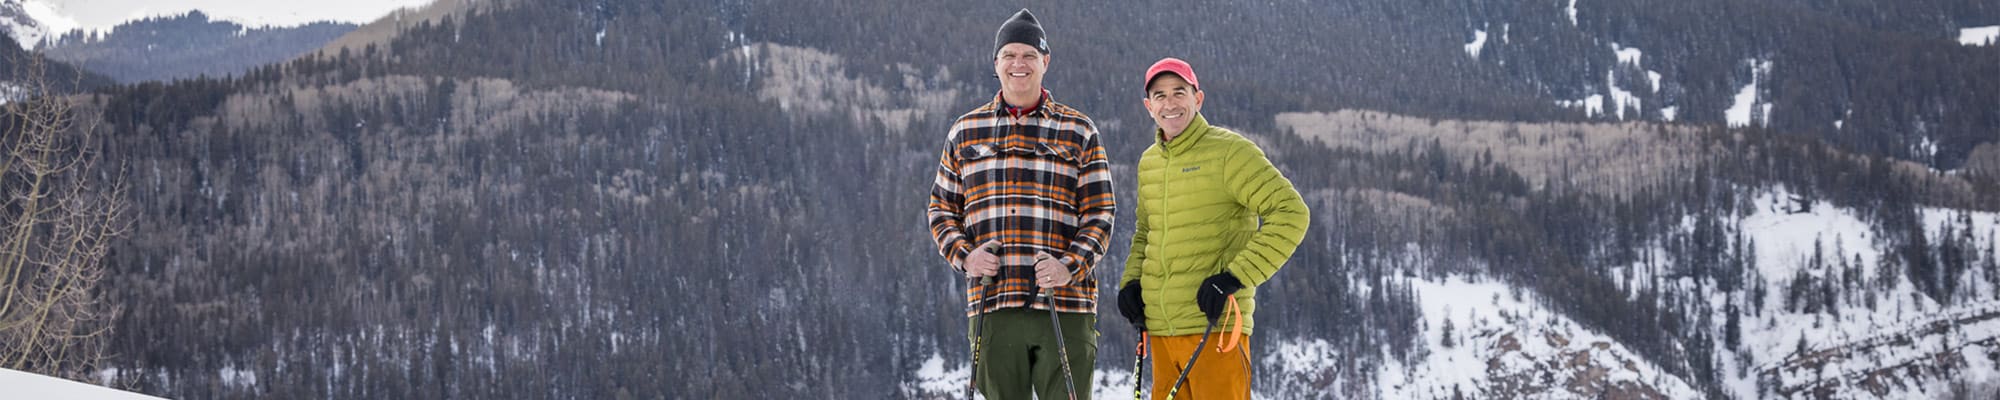 The real estate team of Mike Shimkonis and Asa Van Gelder out for a winter ski tour.